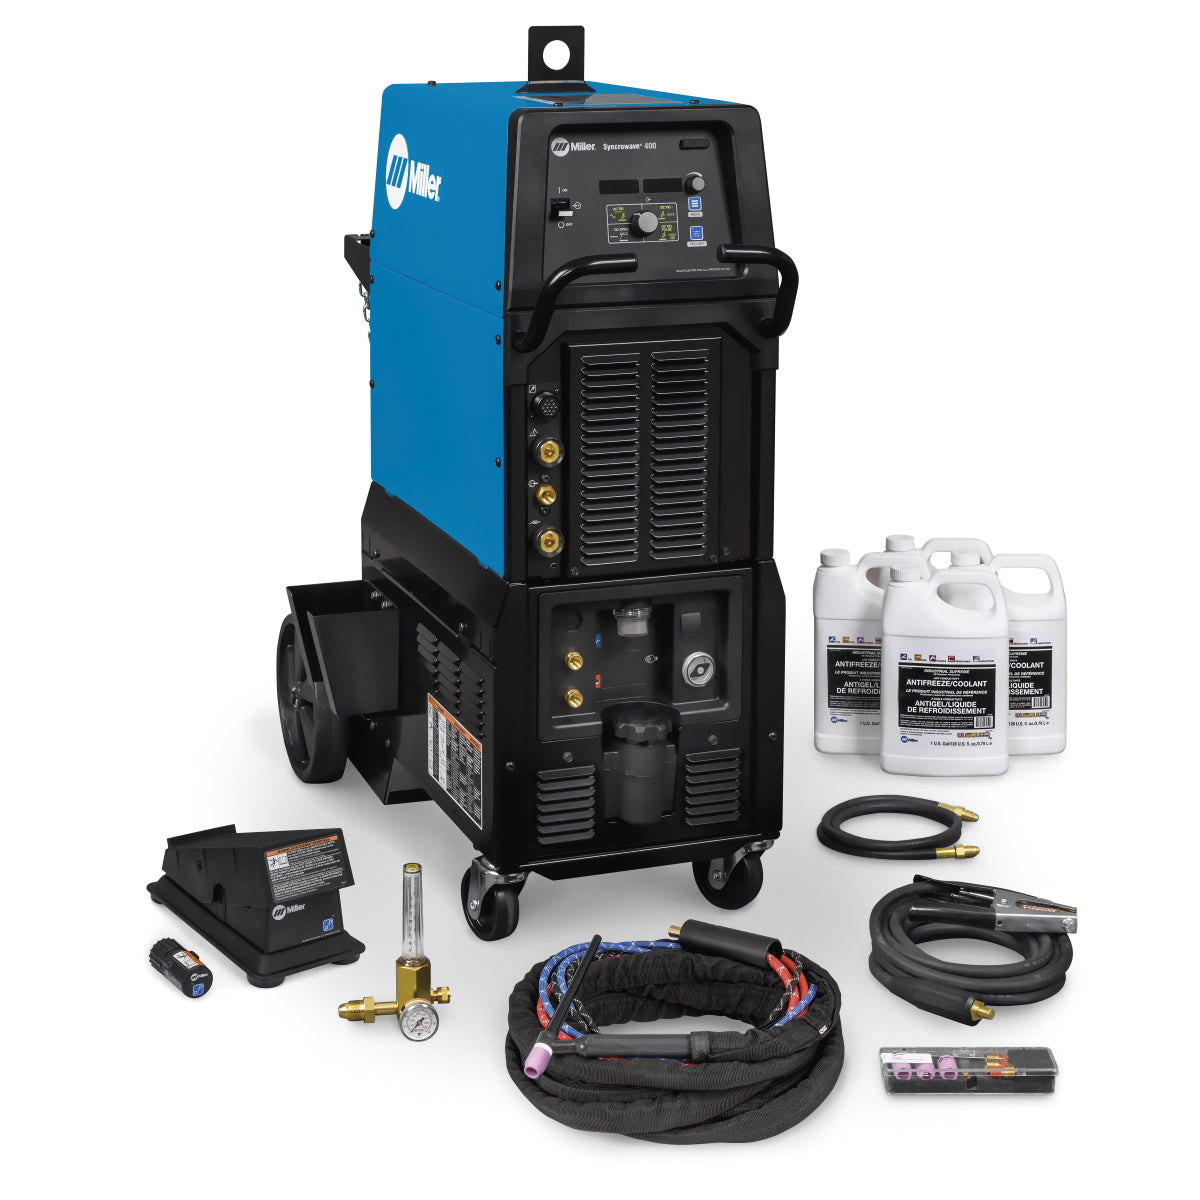 Miller Syncrowave 400 AC/DC TIG and Stick Welder Complete w/Wireless Foot Control (951832)